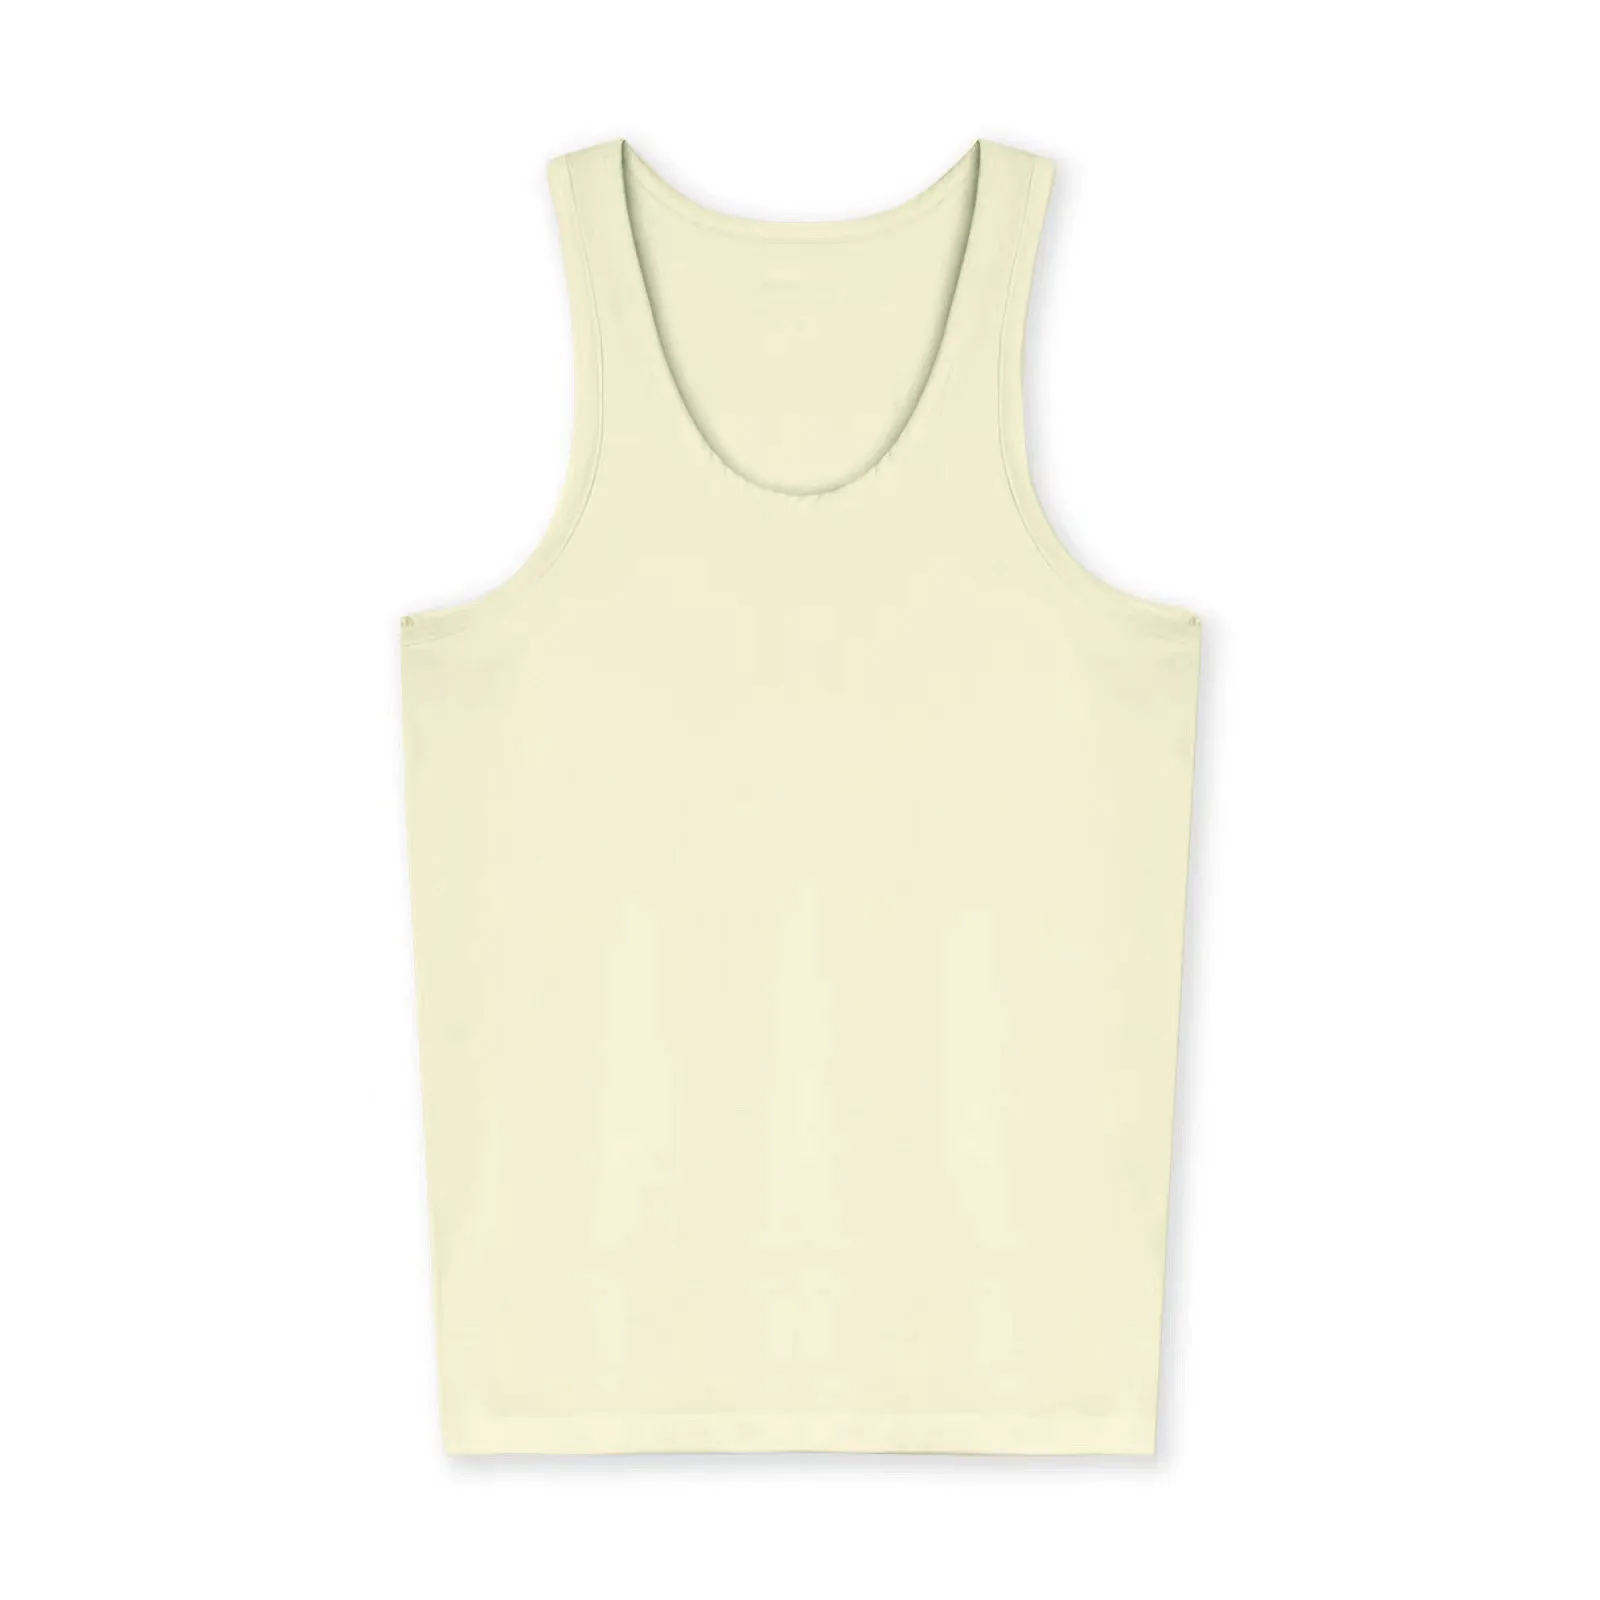 Body Building Wife Beaters White Tank Top Gym Polyester Sleeveless ...